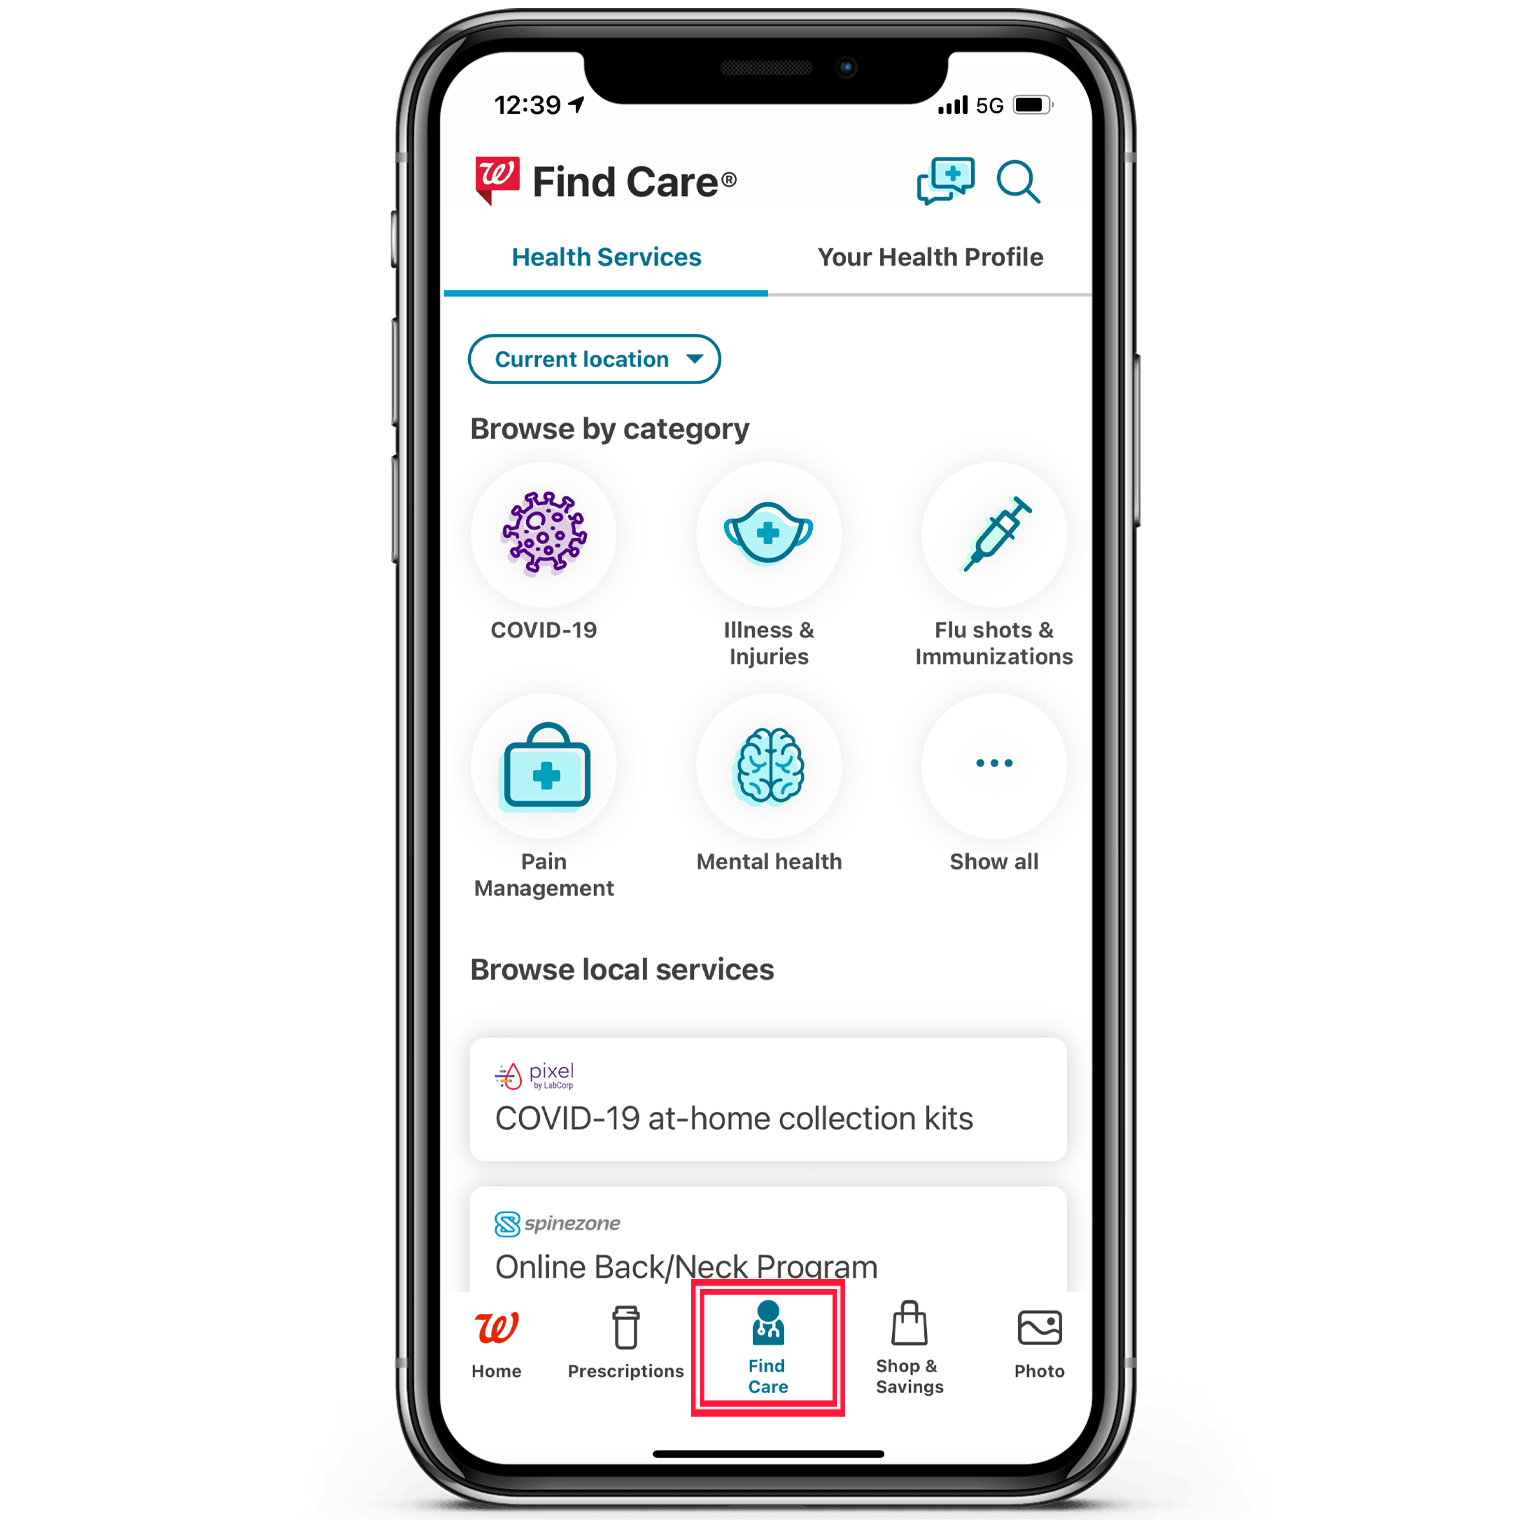 The Find Care section in the Walgreens app.